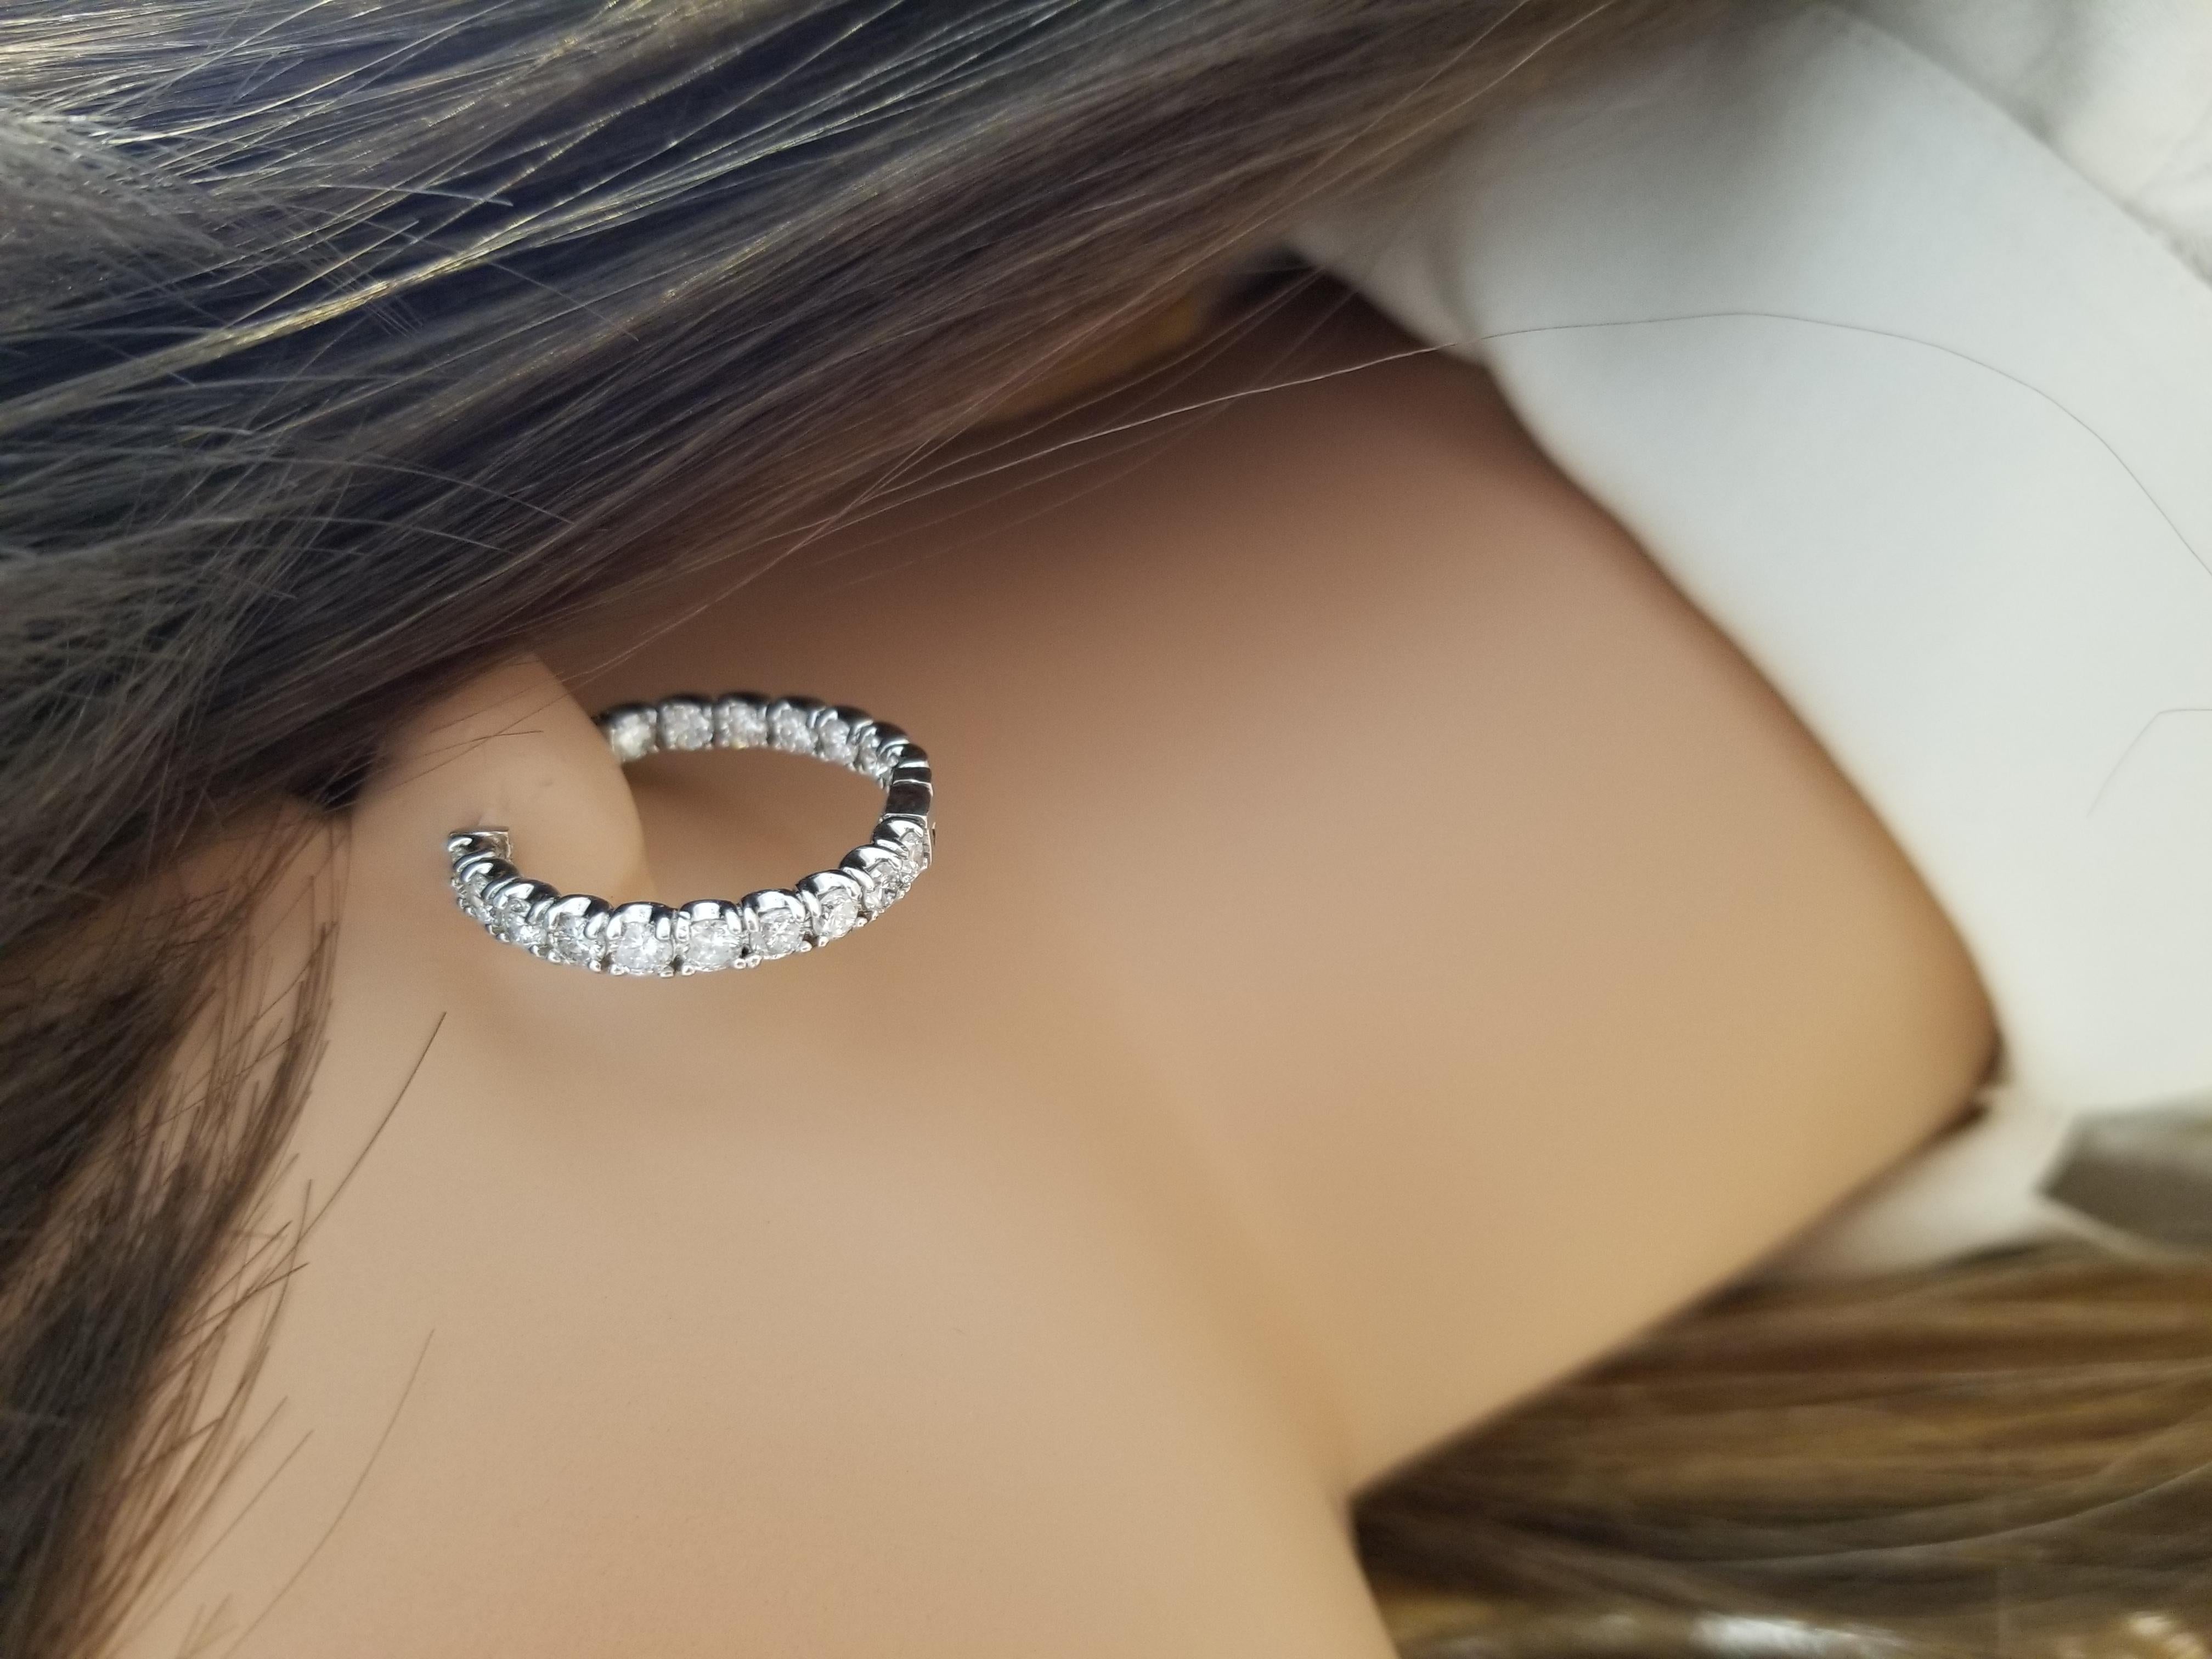 This is a lovely pair of inside & outside hoops, set with 34 stunning diamonds that total up to 2.90 carats. Precision set in 14k white gold earrings, these diamond hoops take it to the next level.